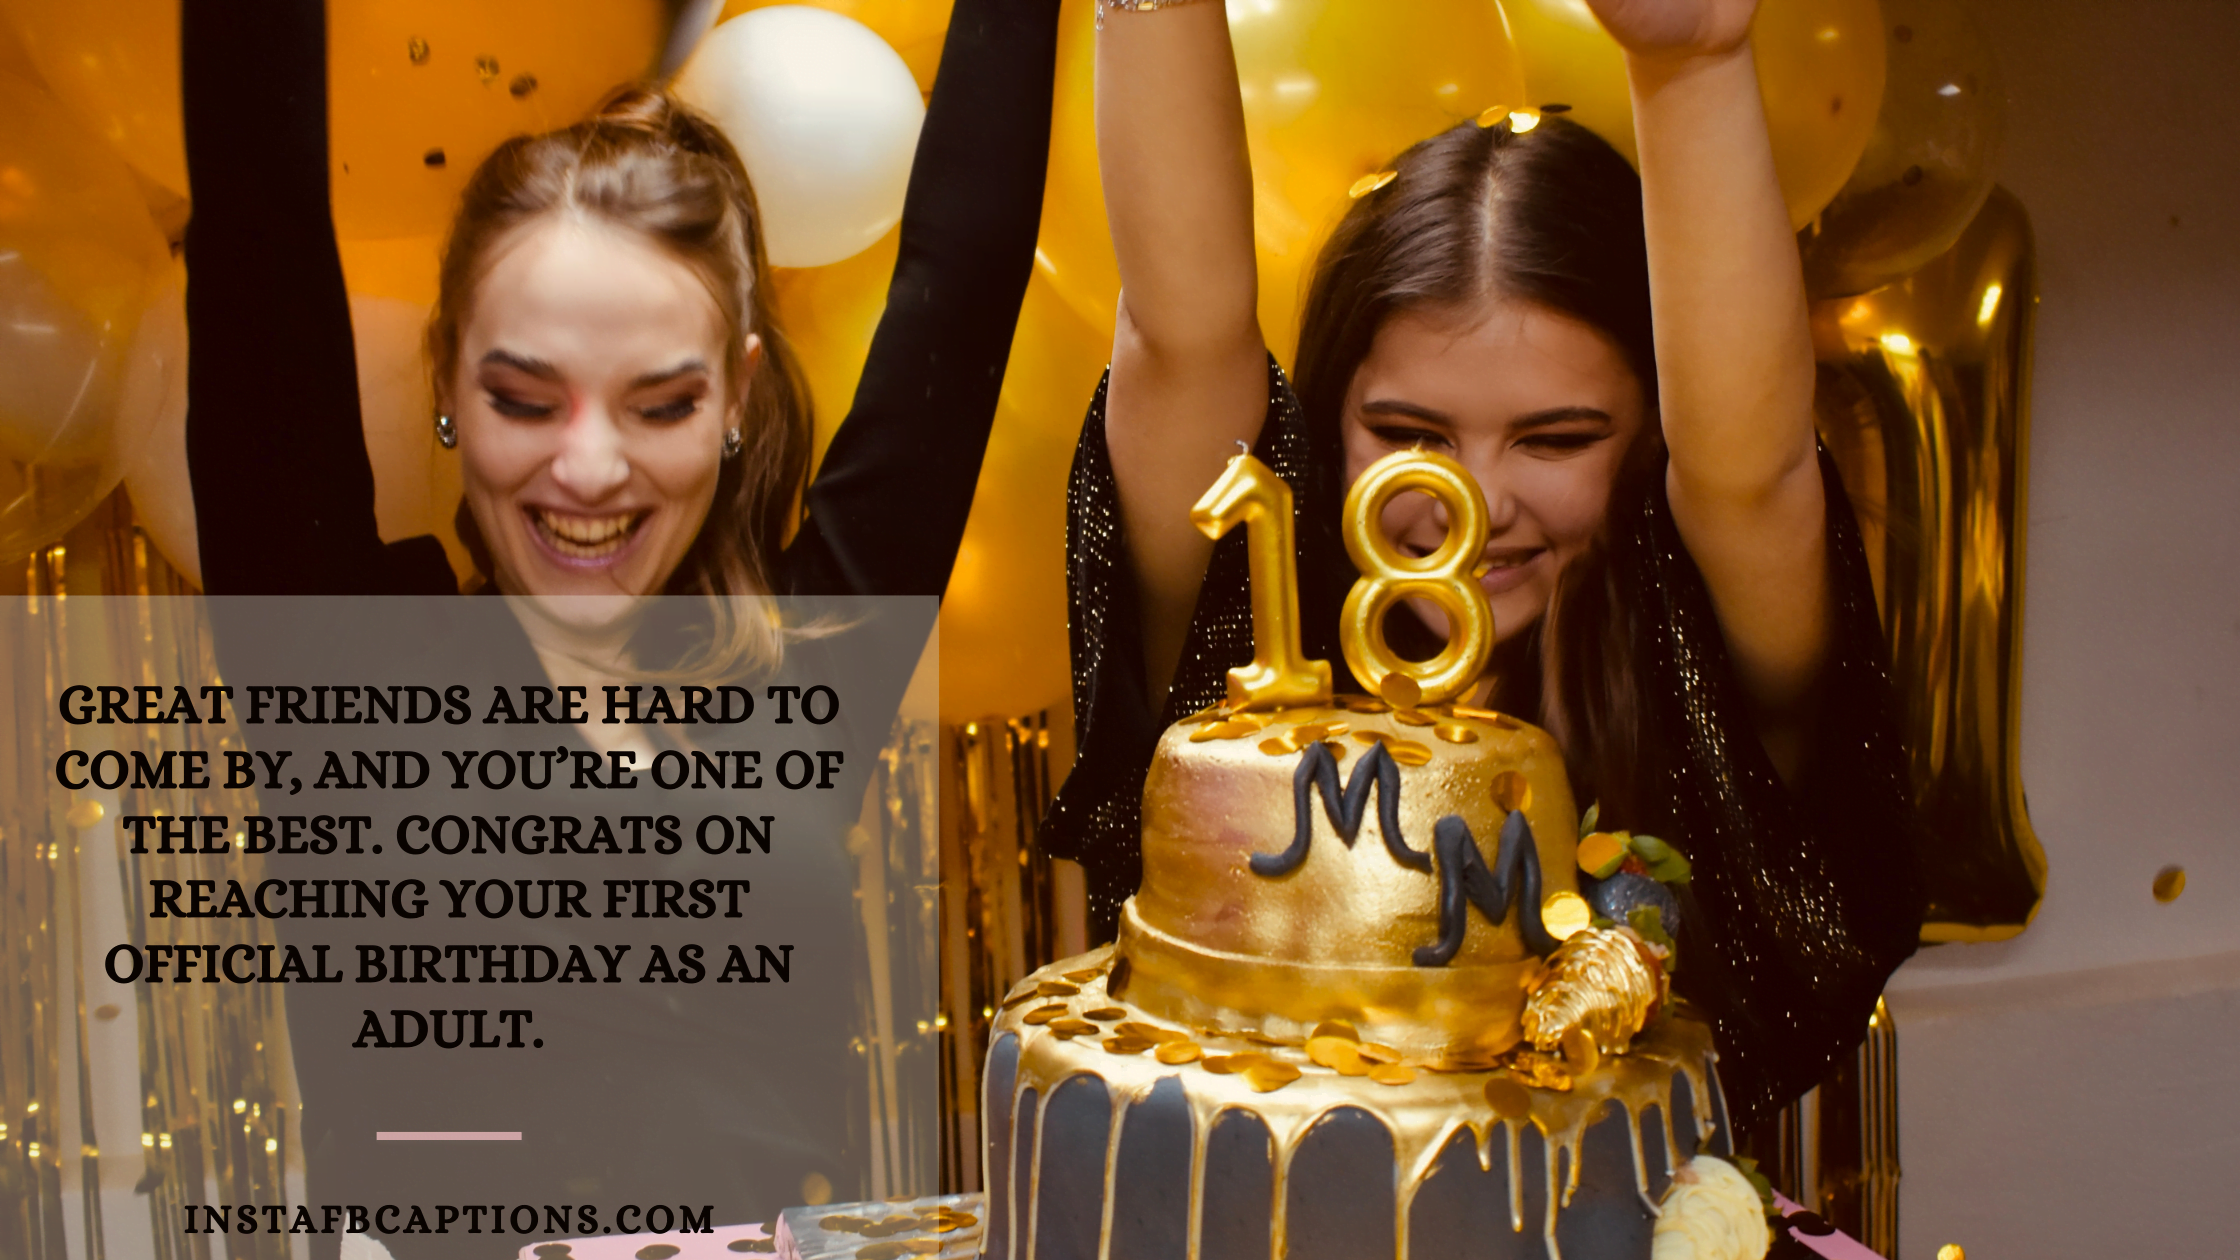 Great friends are hard to come by, and you’re one of the best. Congrats on reaching your first official birthday as an adult.  - 18th birthday wishes for best friend  - 200+ 18th Birthday Captions &#038; Quotes For Instagram [2023]